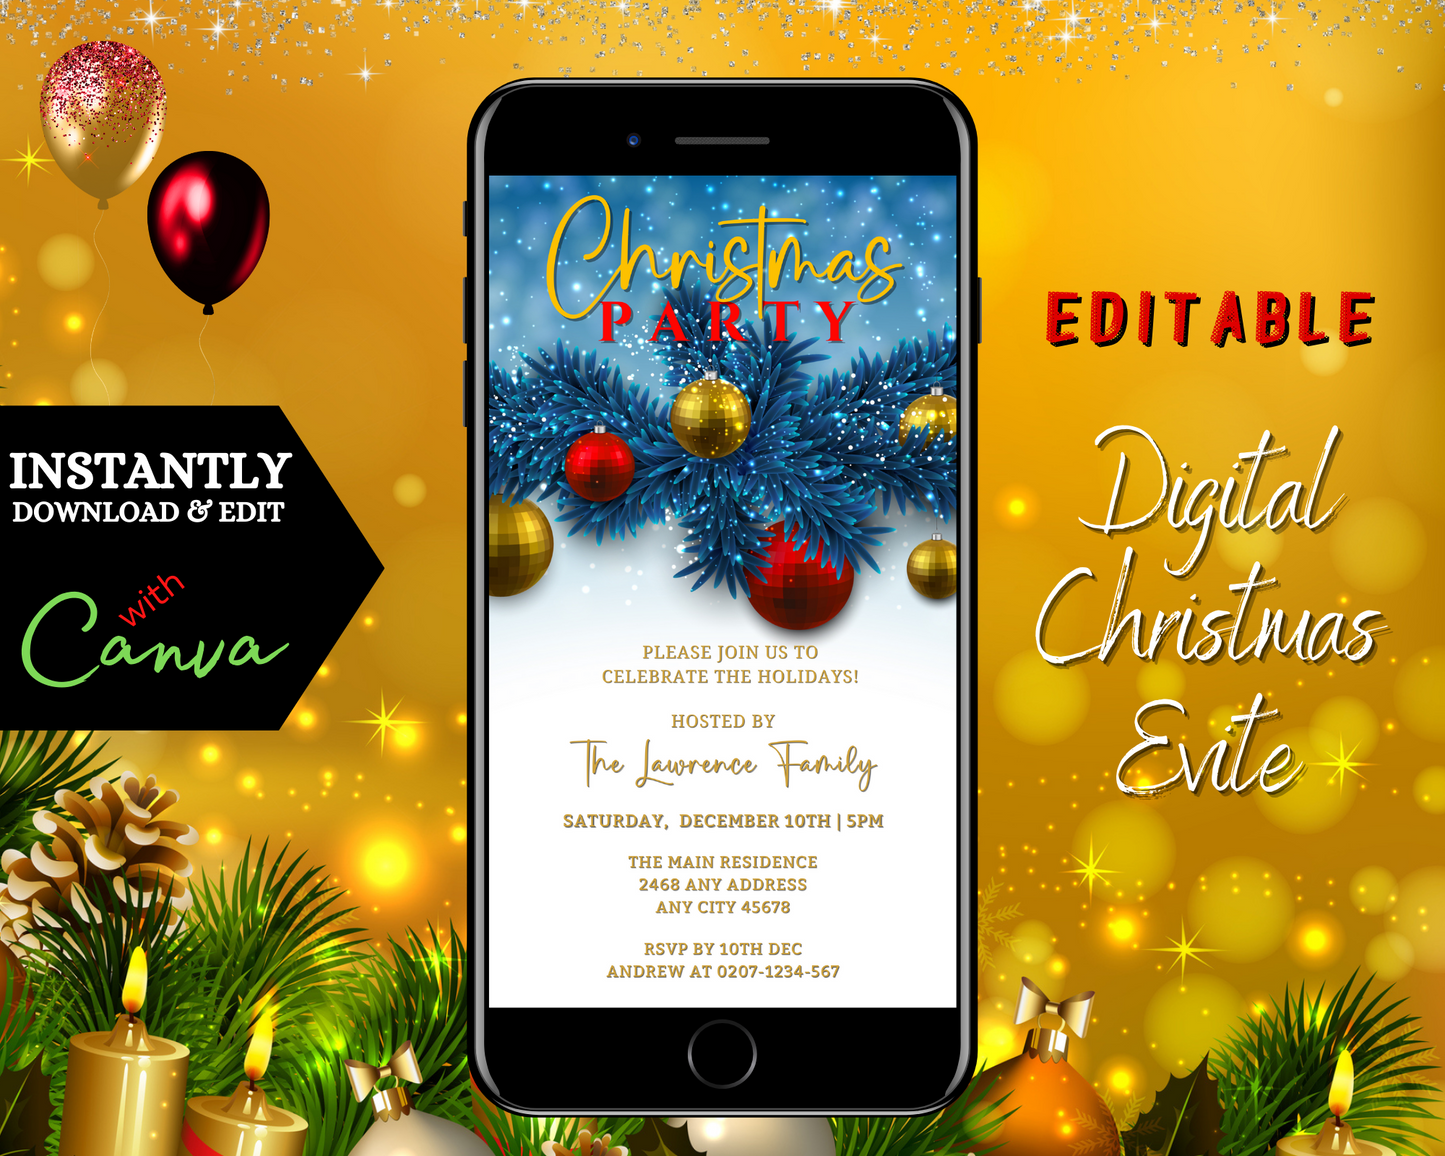 Smartphone displaying a customizable Christmas party invitation with blue, gold, and red ornaments. Editable via Canva for easy personalization and electronic sharing.